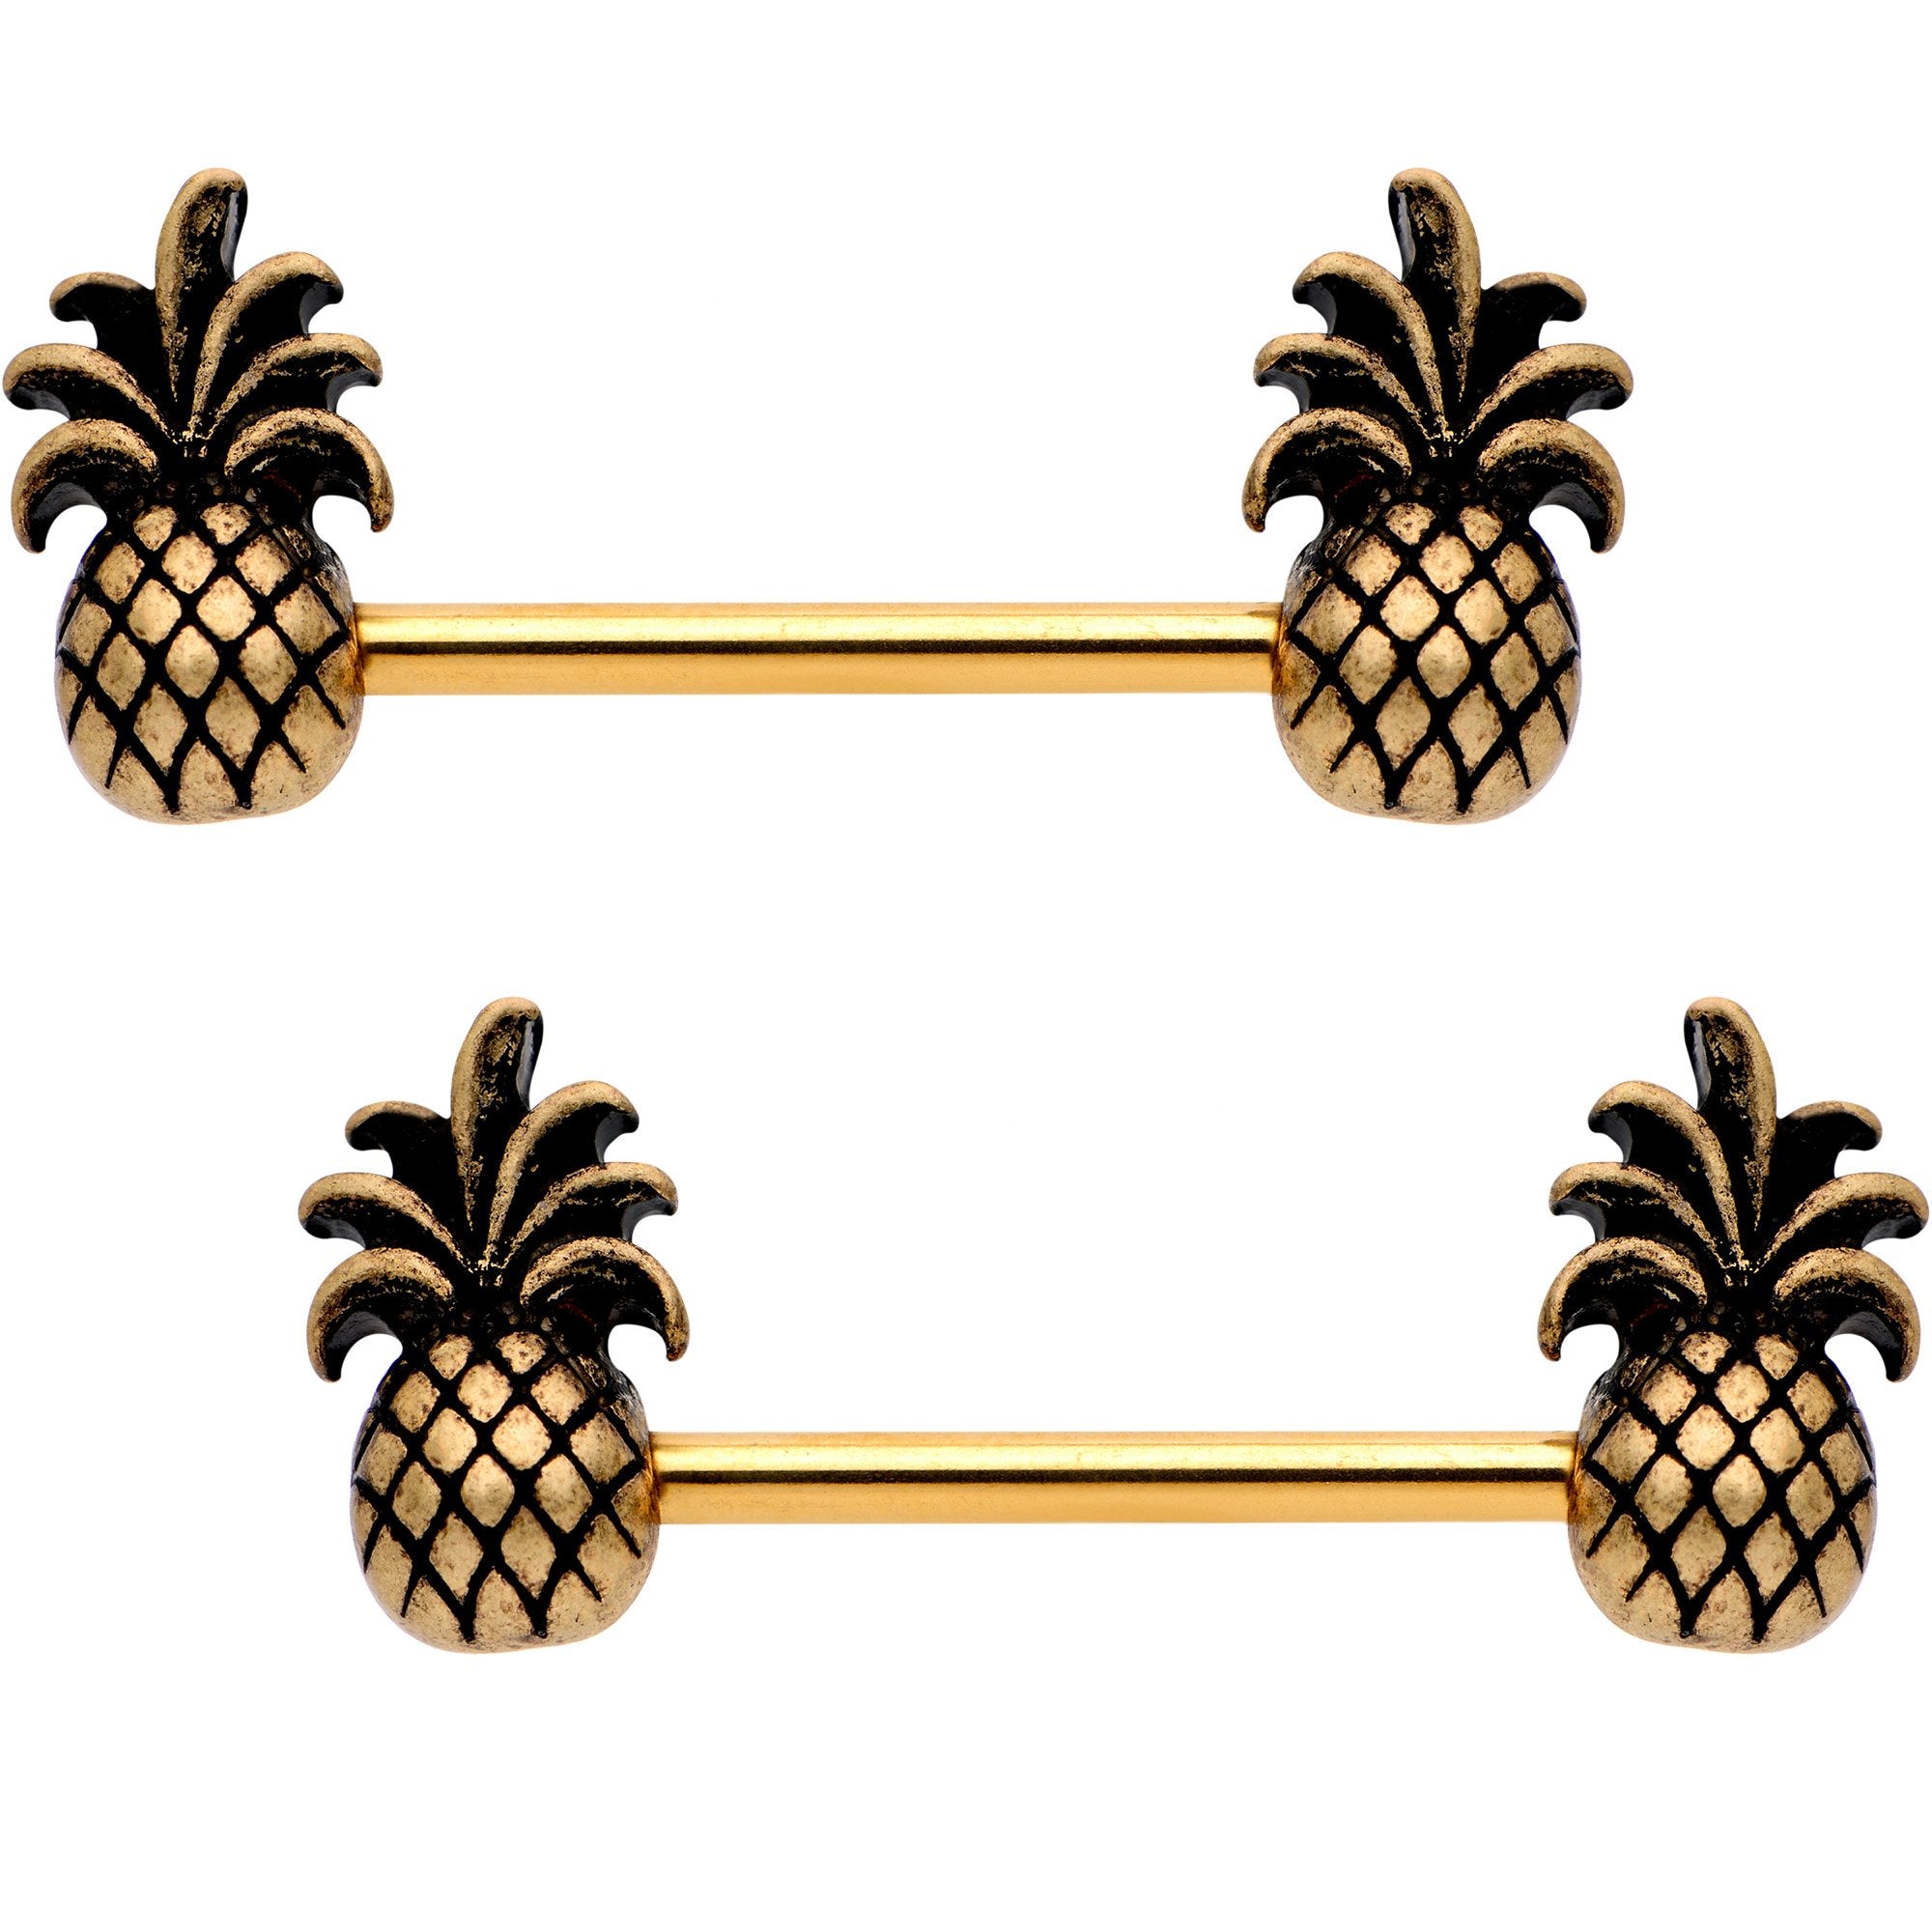 5/8 Gold Tone Anodized Pineapple Pizzazz Barbell Nipple Ring Set